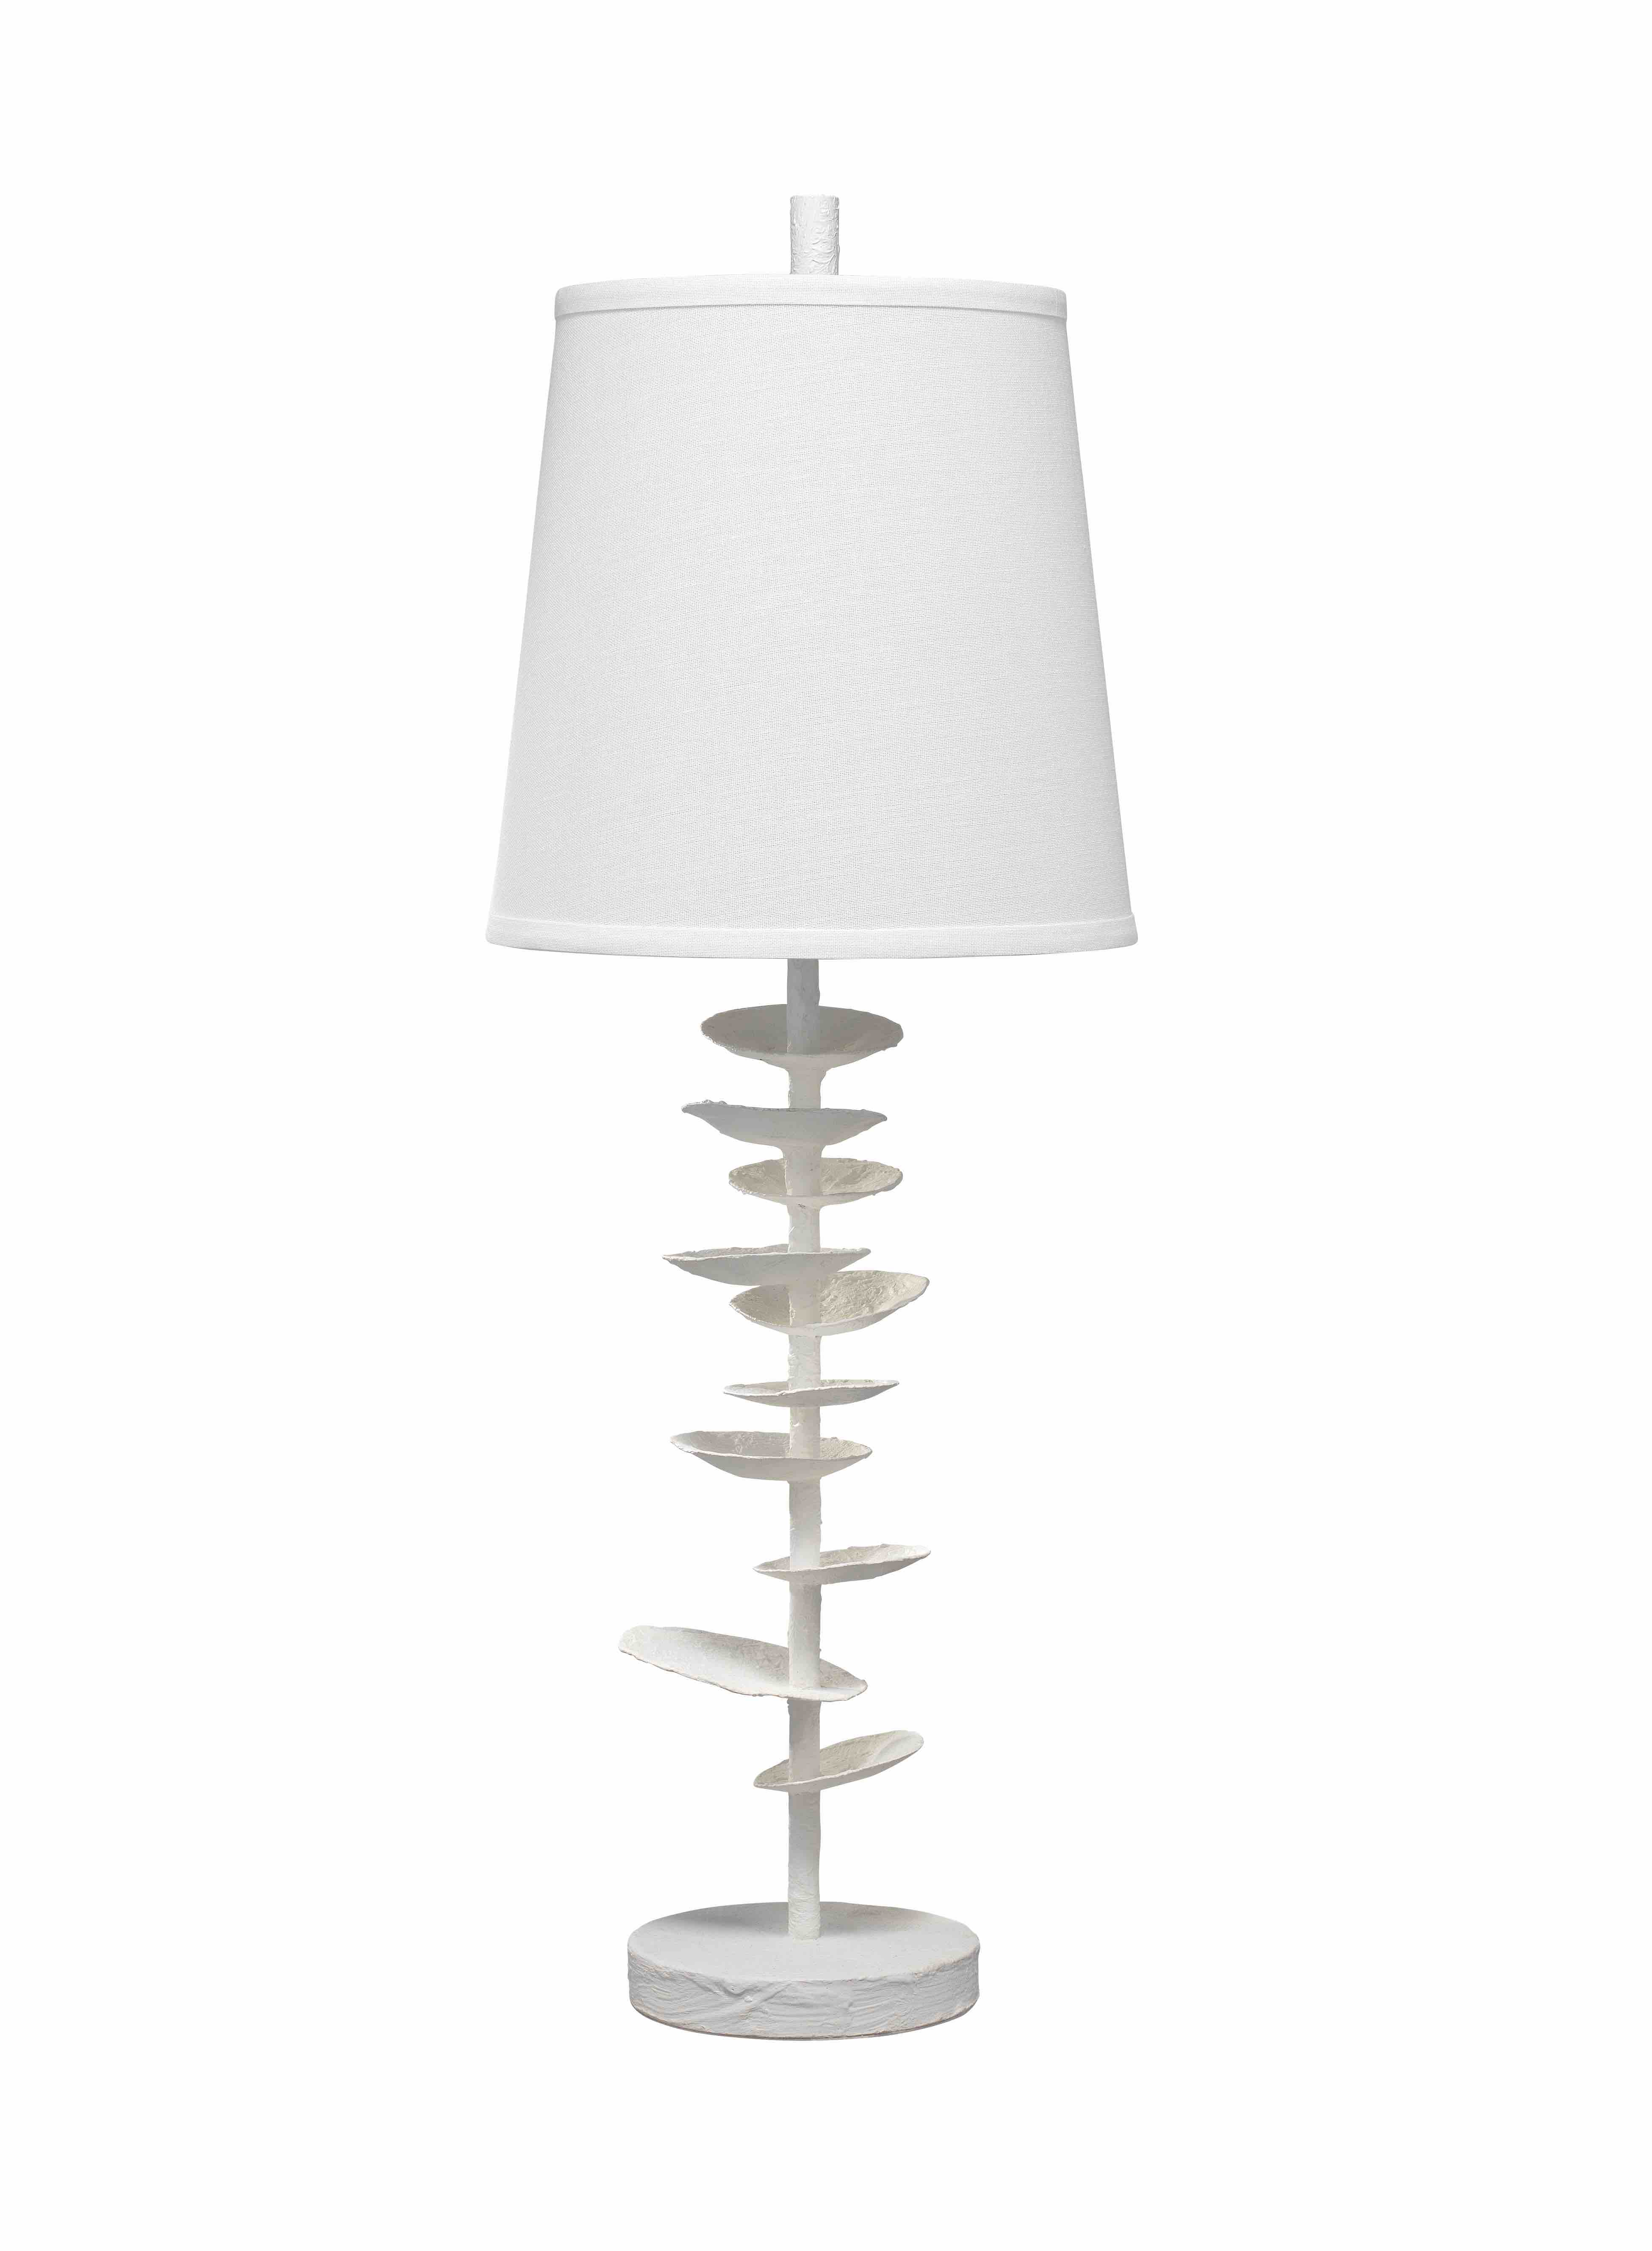 Jamie Young Petals table lamp